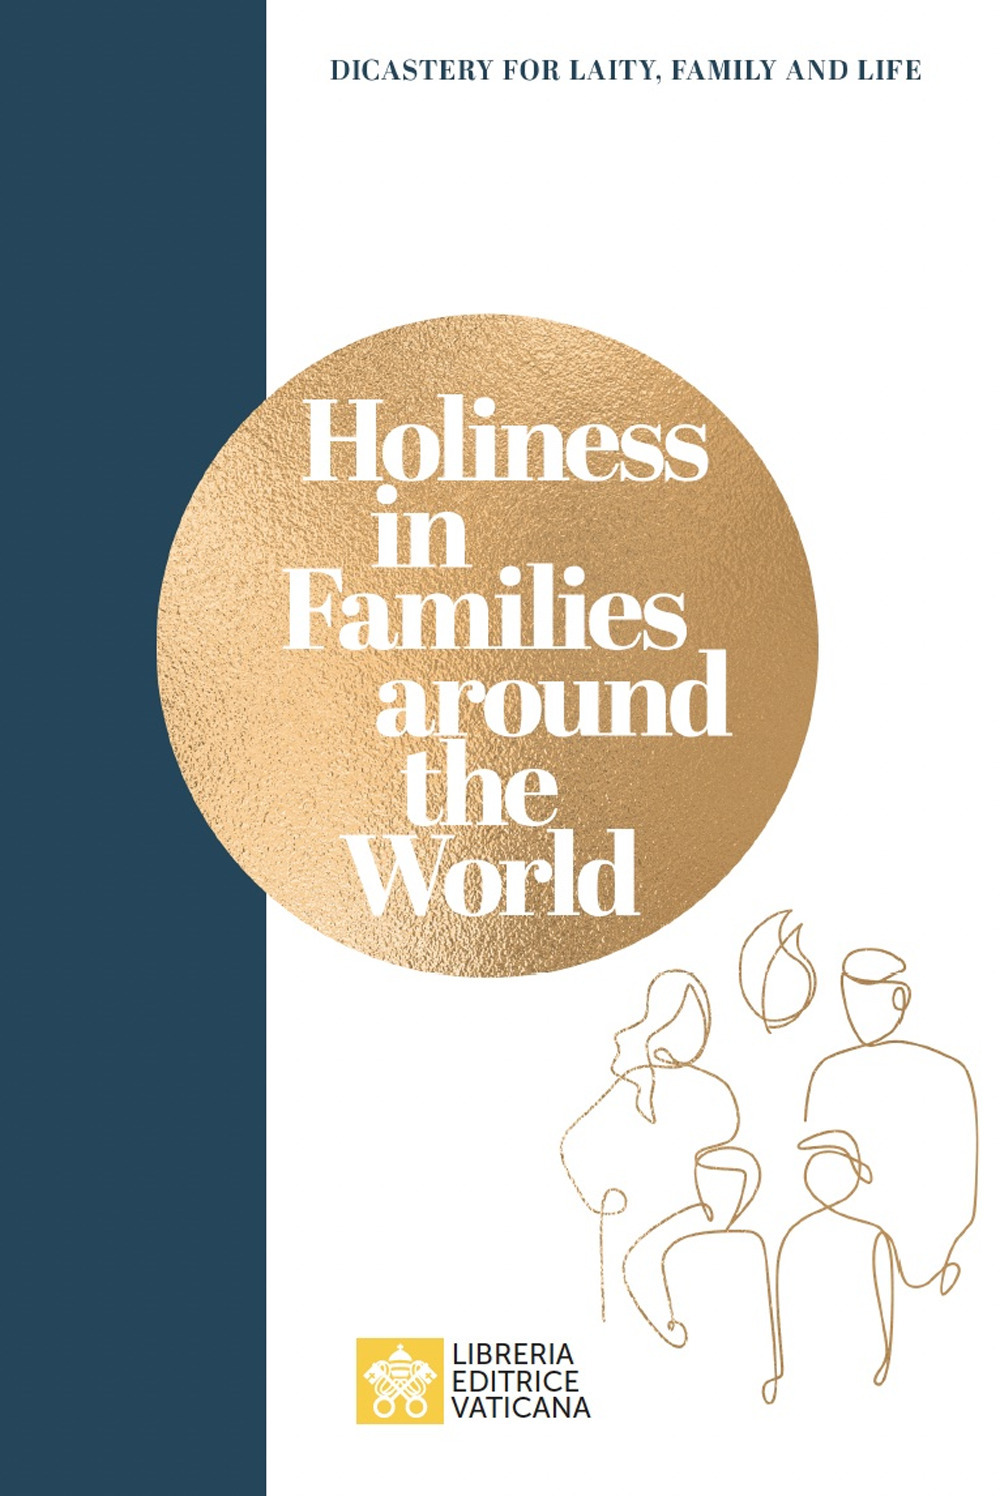 Holiness in families around the world